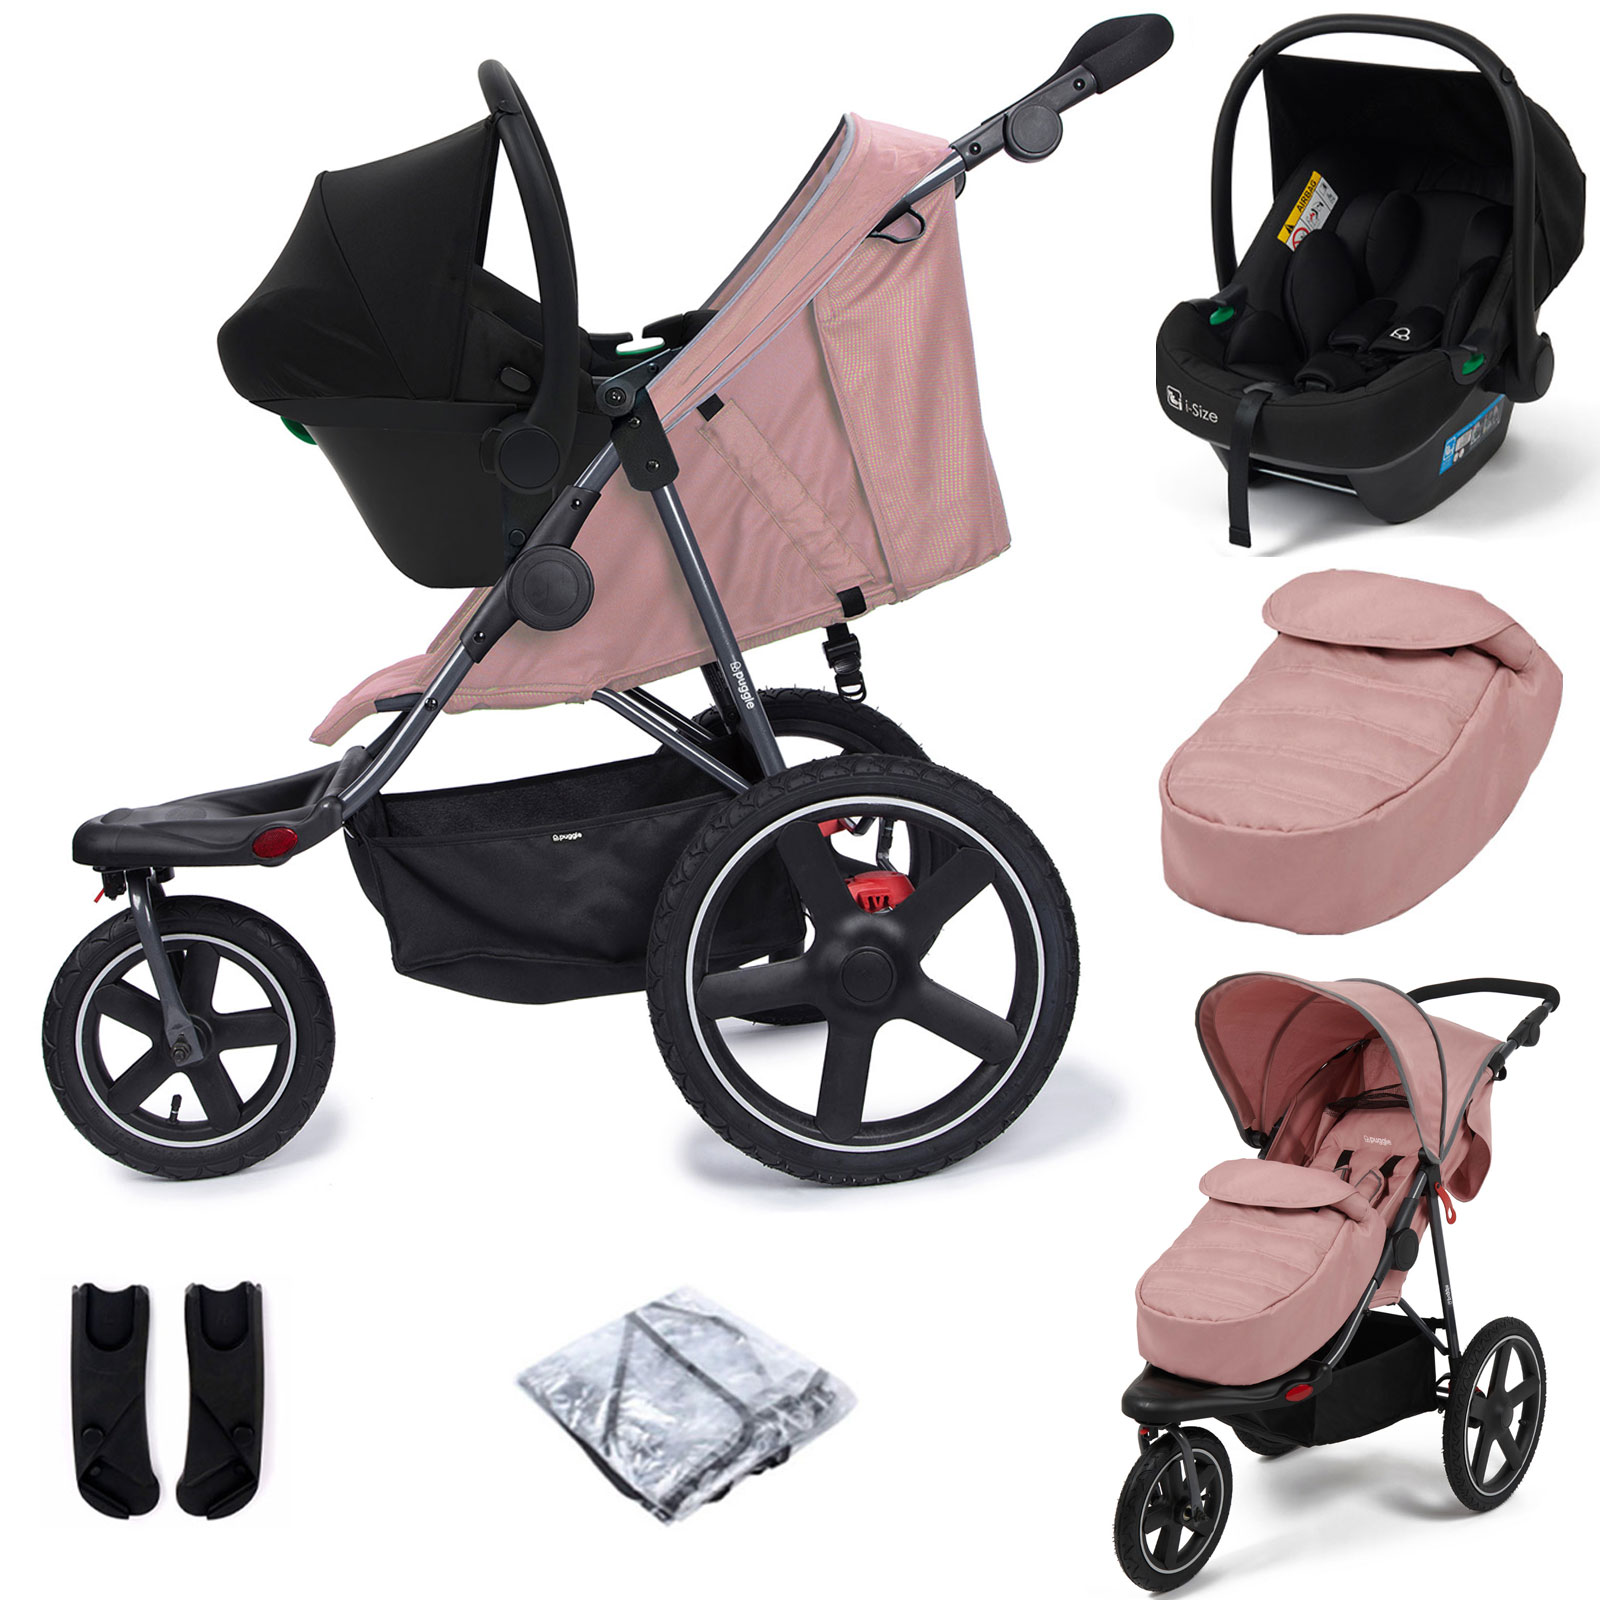 Puggle Urban Terrain Sprint GT Travel System, Adapters & Safe Fit i-Size Car Seat - Dusk Pink